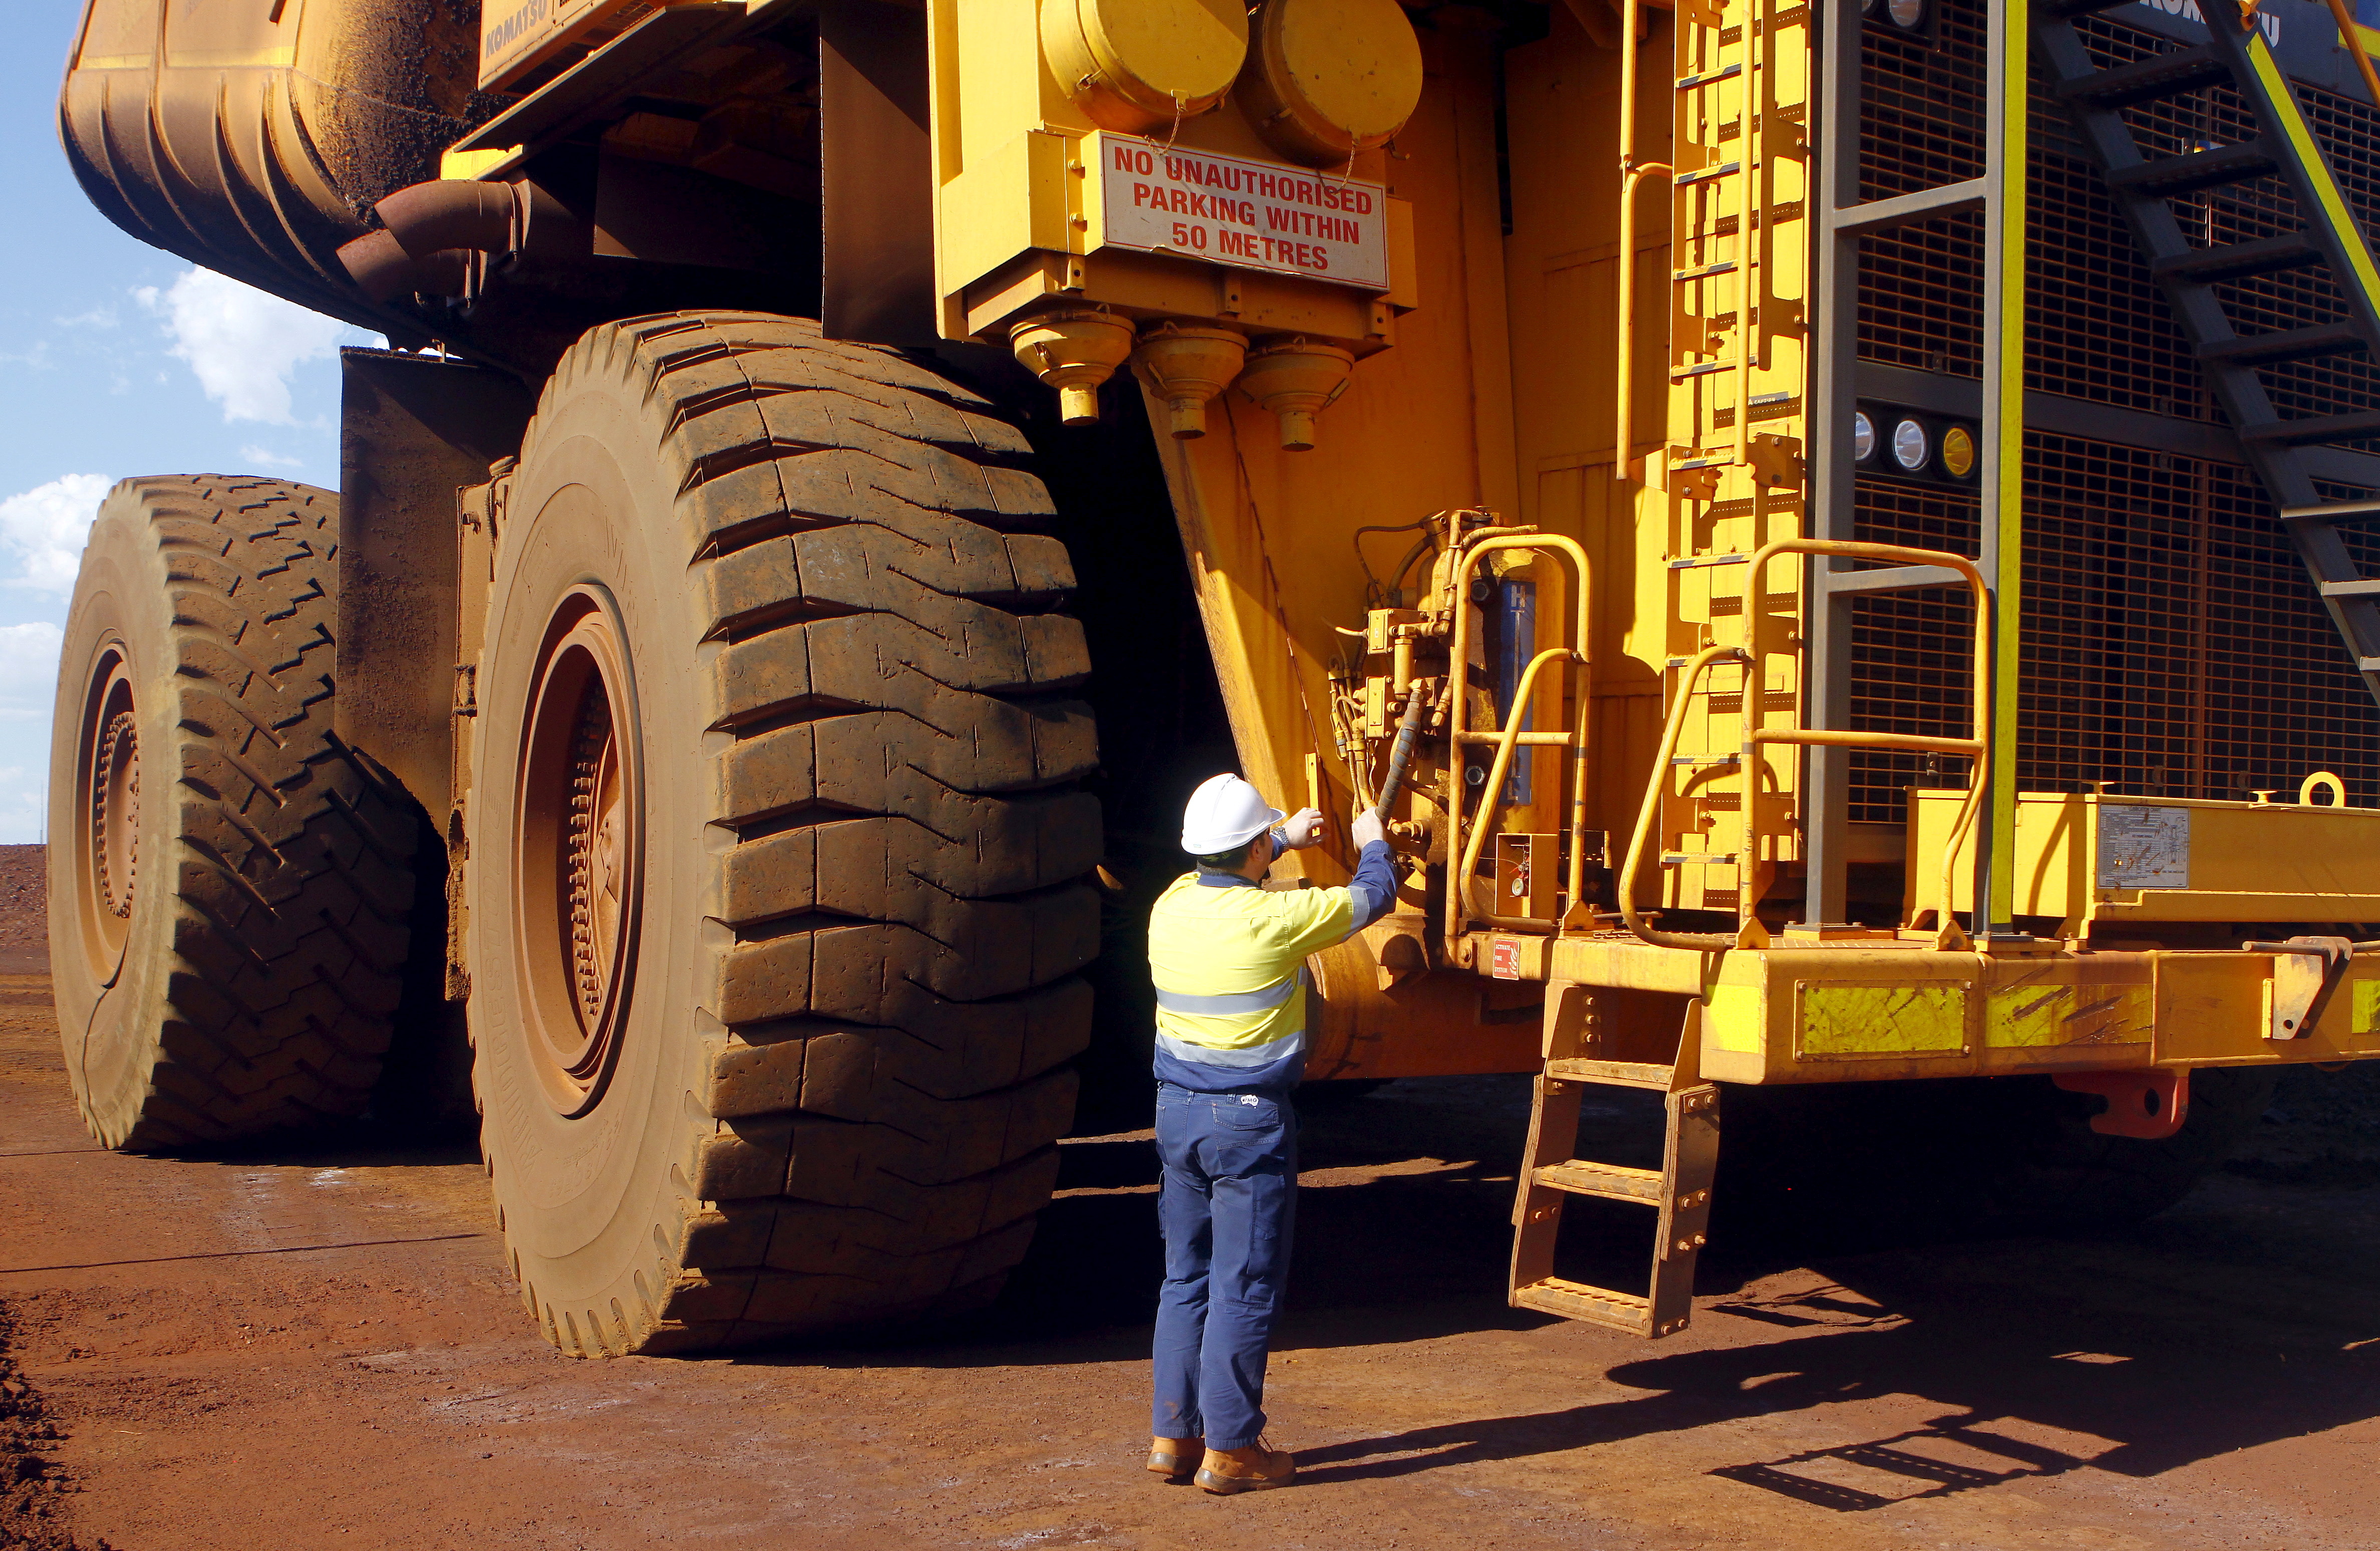 A worker checks a truck loaded with iron ore at the Fortescue Metals Group (FMG) Christmas Creek iron ore mine located south of Port Hedland in the Pilbara region of Western Australia, November 17, 2015. Picture taken November 17, 2015. REUTERS/Jim Regan